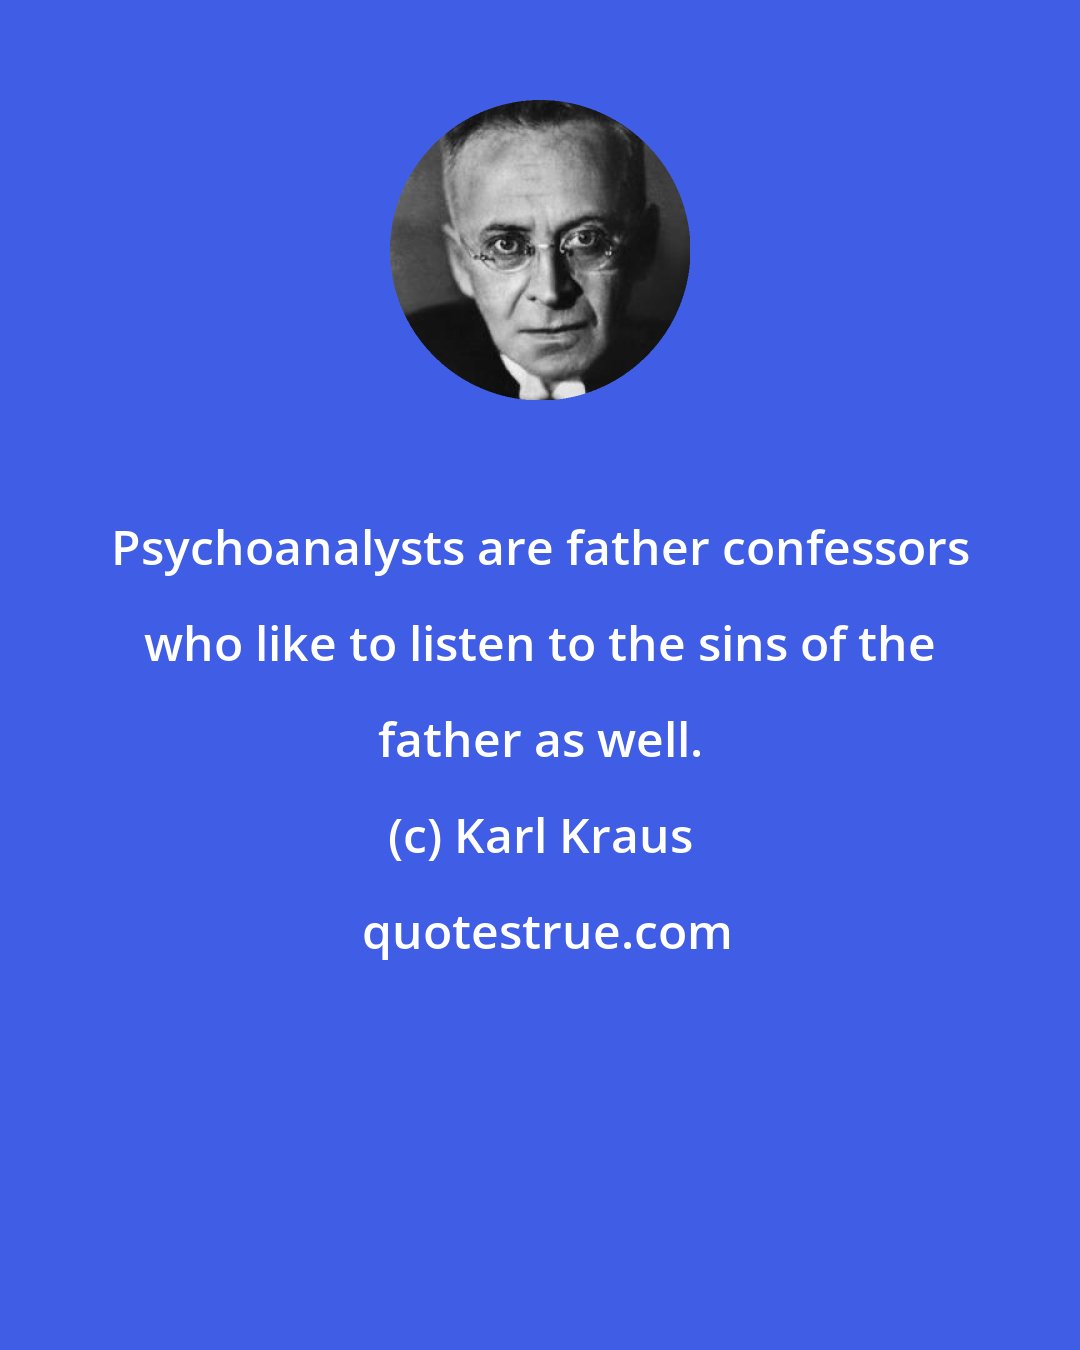 Karl Kraus: Psychoanalysts are father confessors who like to listen to the sins of the father as well.